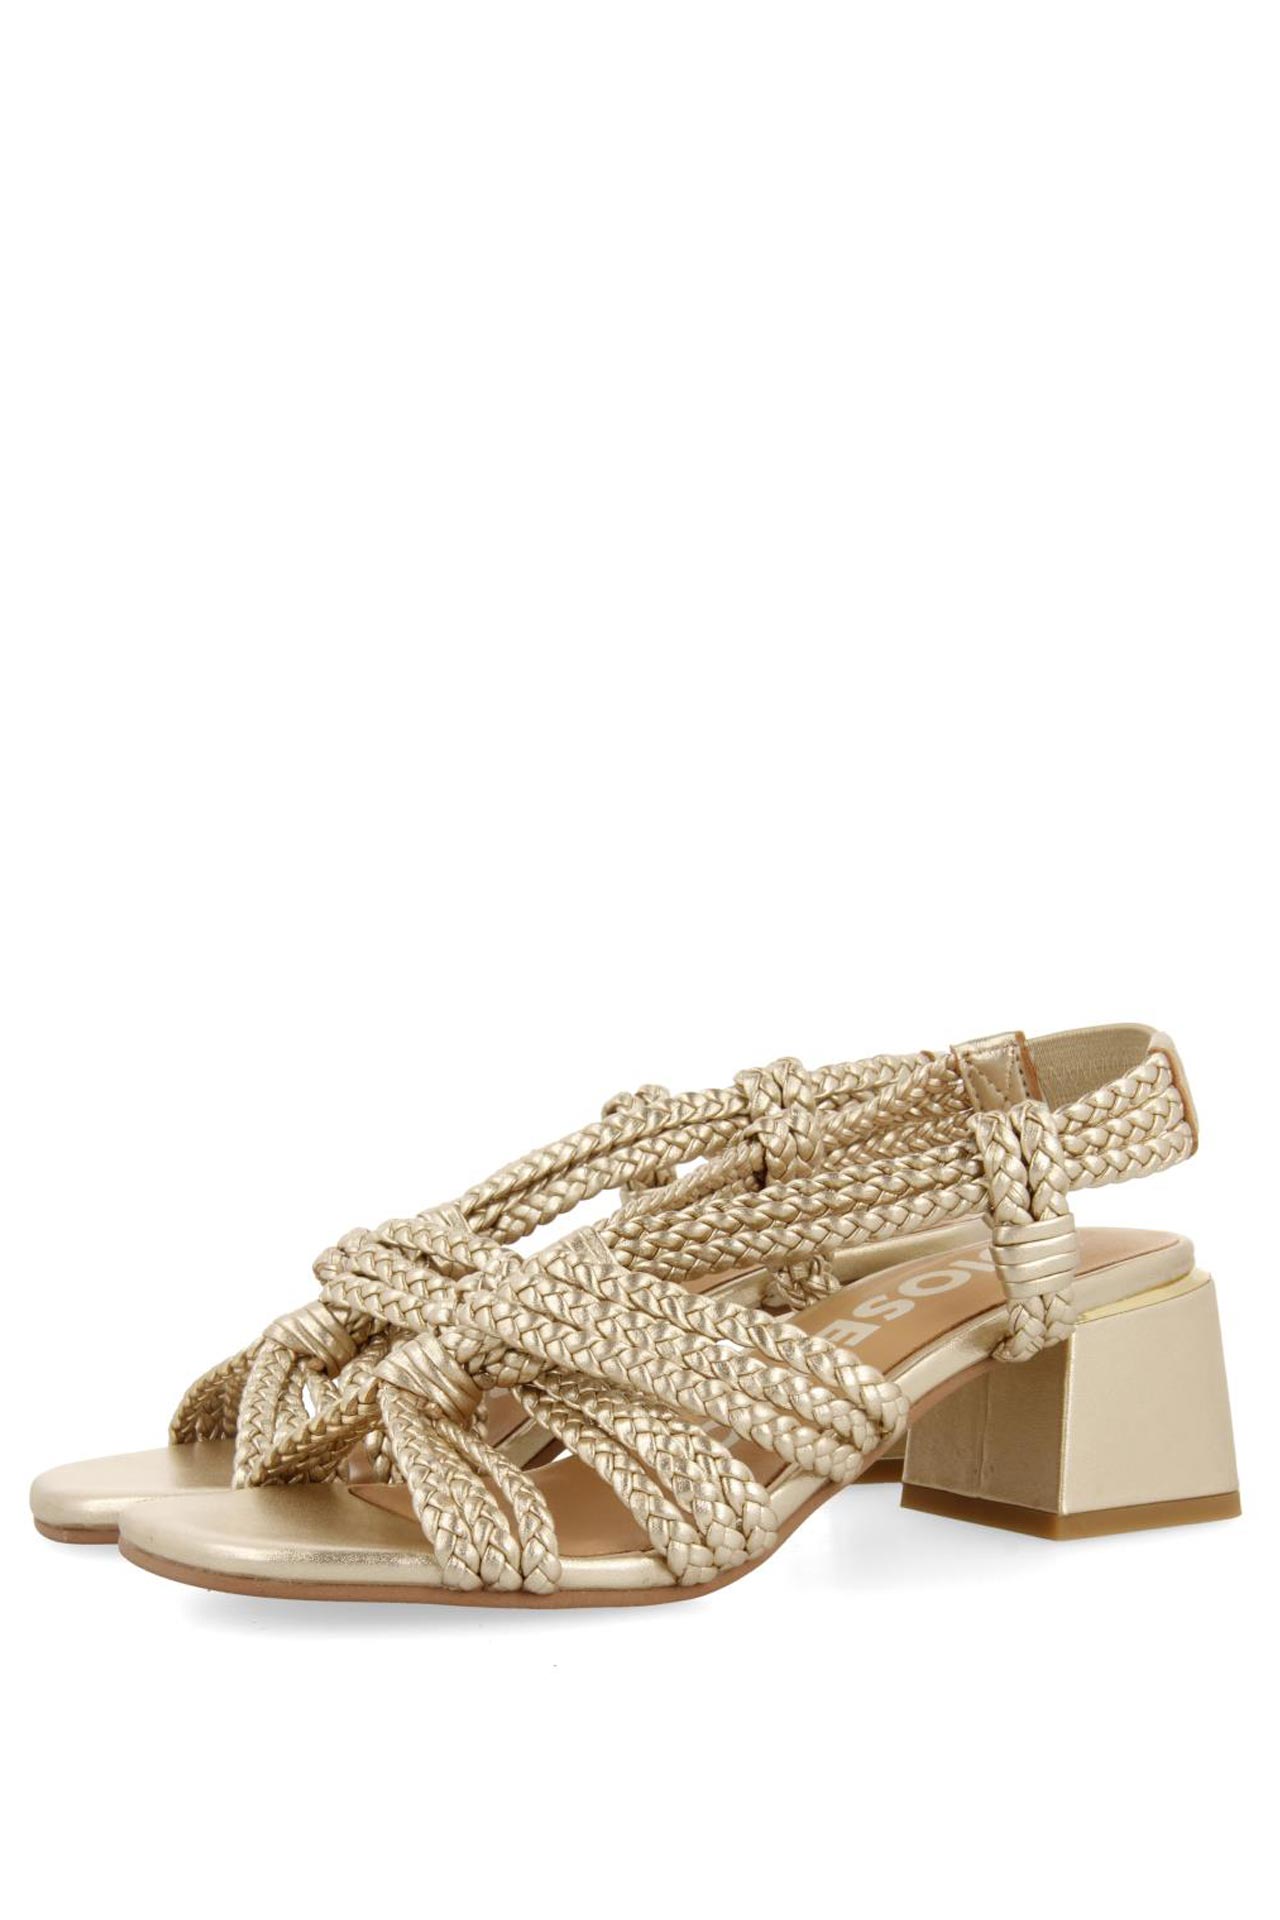 GIOSEPPO MALIQ GOLD LEATHER HEEL SANDALS WITH BRAIDED DETAIL